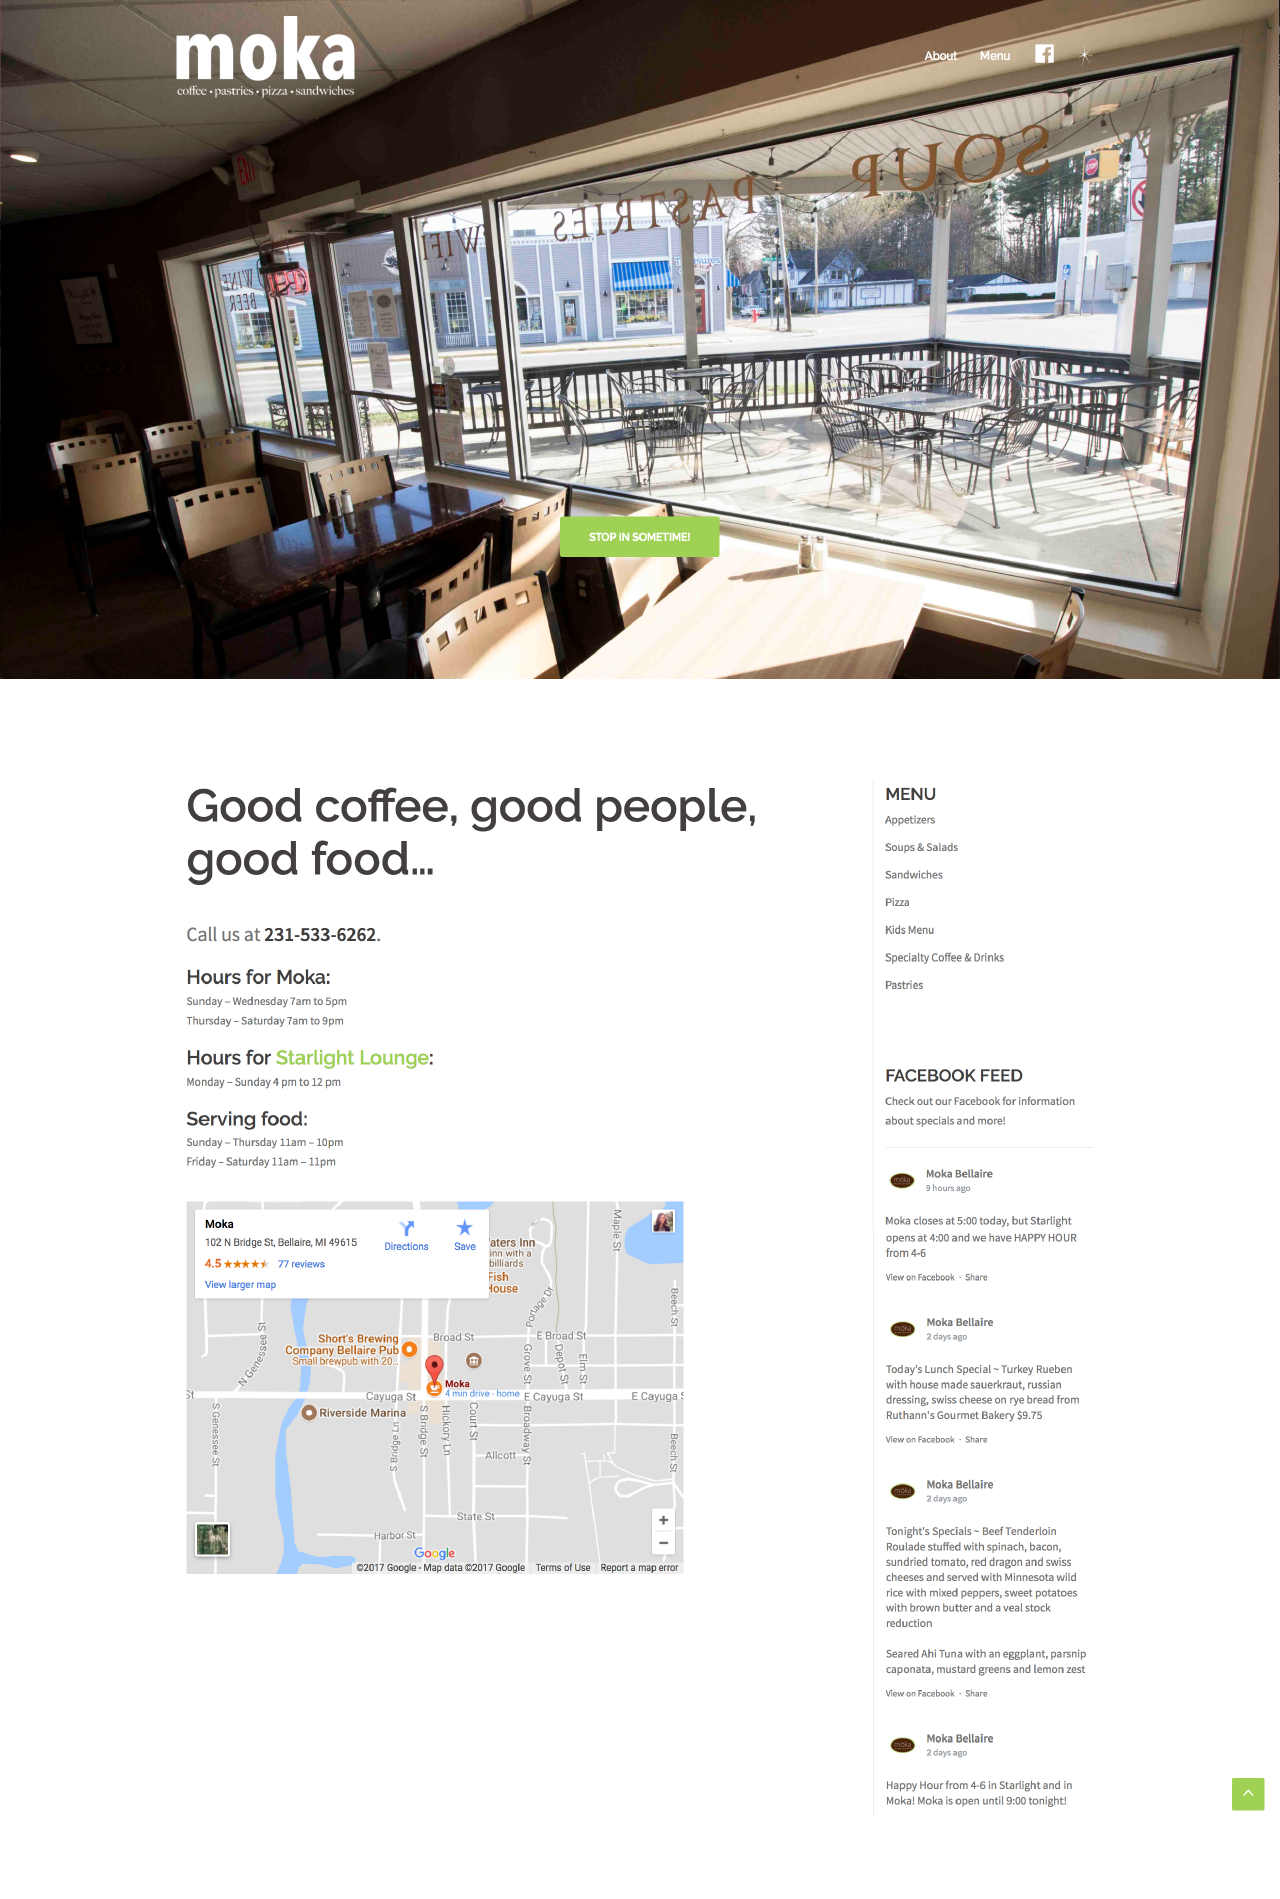 A webpage with a full-screen photo of a view from inside the building and a top navigation. It contains information about hours and location as well as a Facebook feed sidebar below.